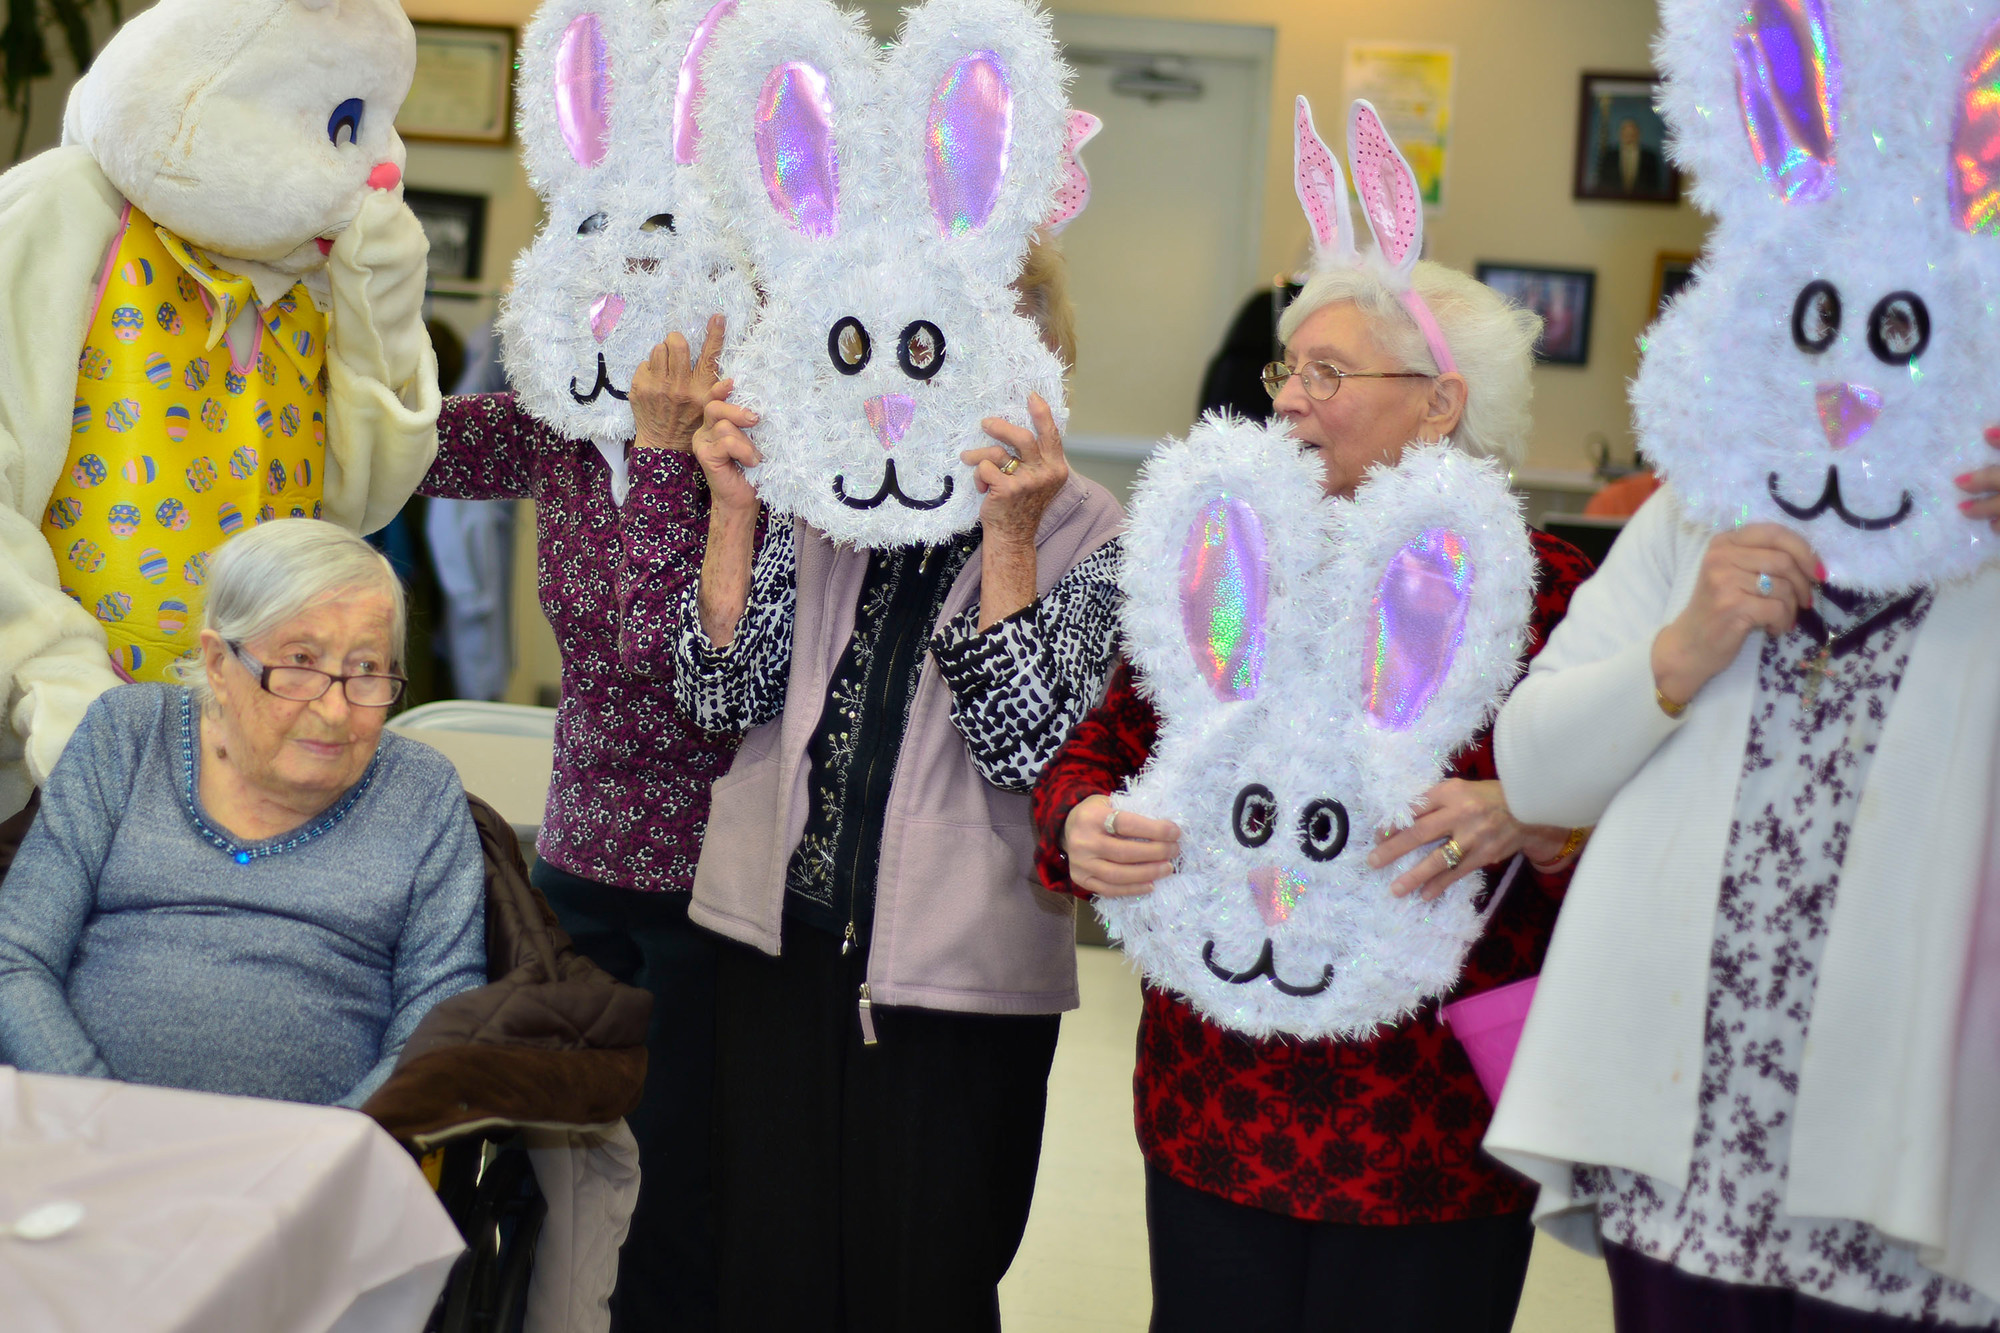 The Easter Bunnies surrounded Molly Spiegel, seated, who is 104.